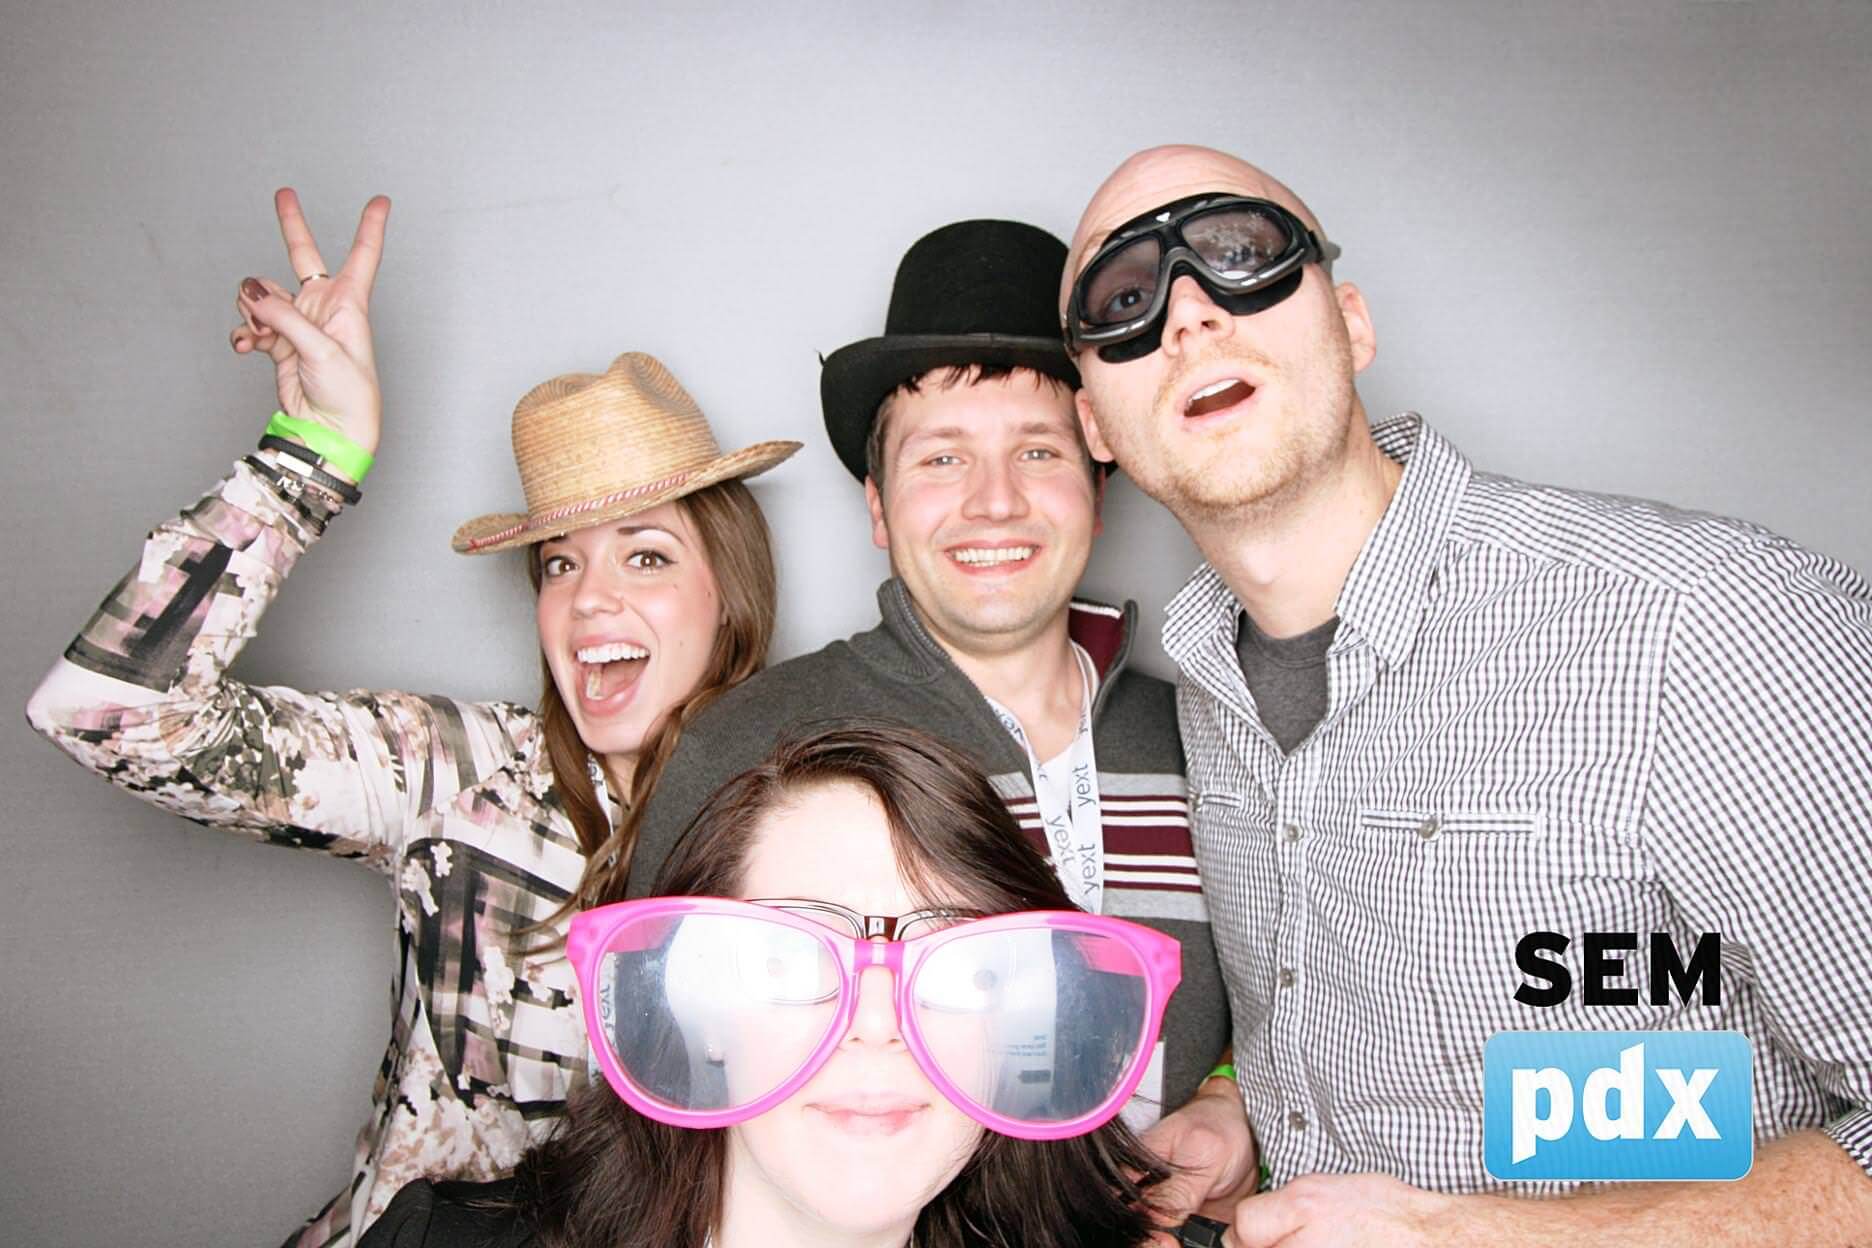 SearchFest 2014 After Party Photo Booth